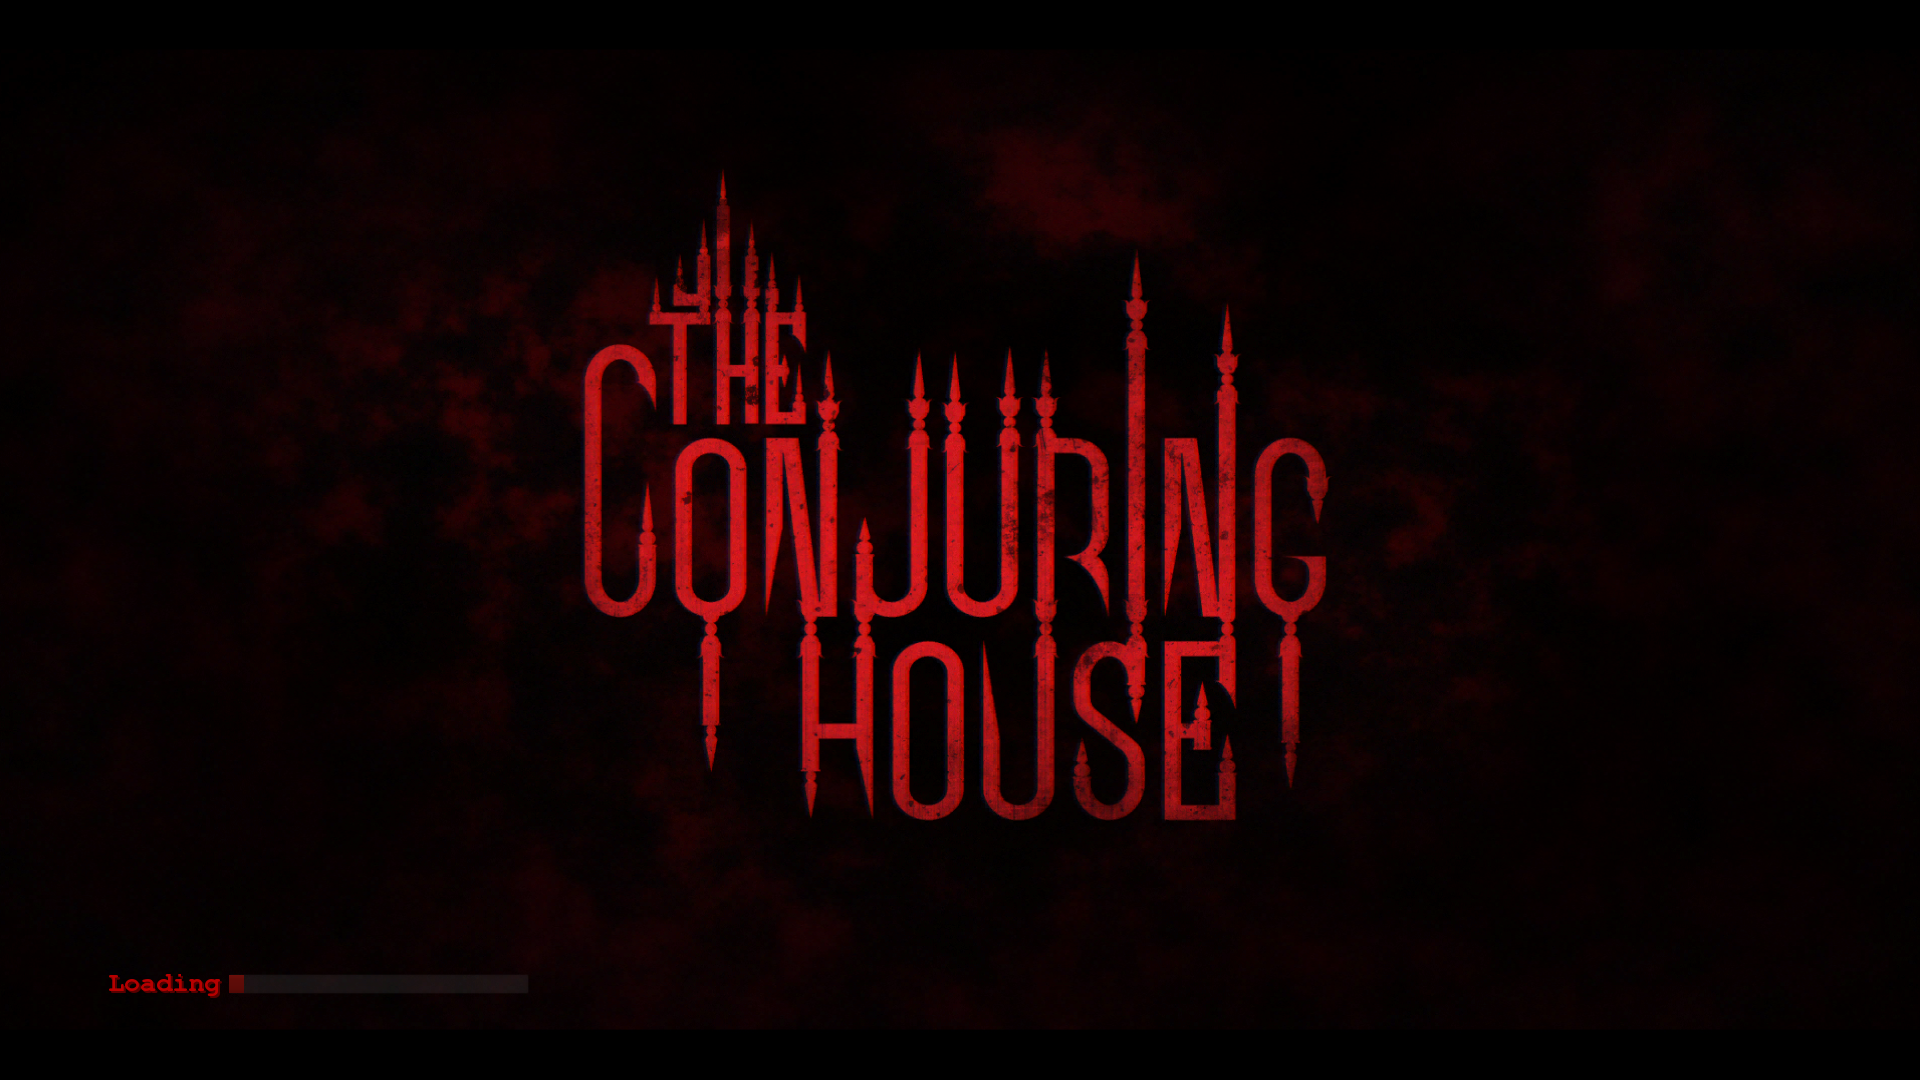 The Conjuring House title screen